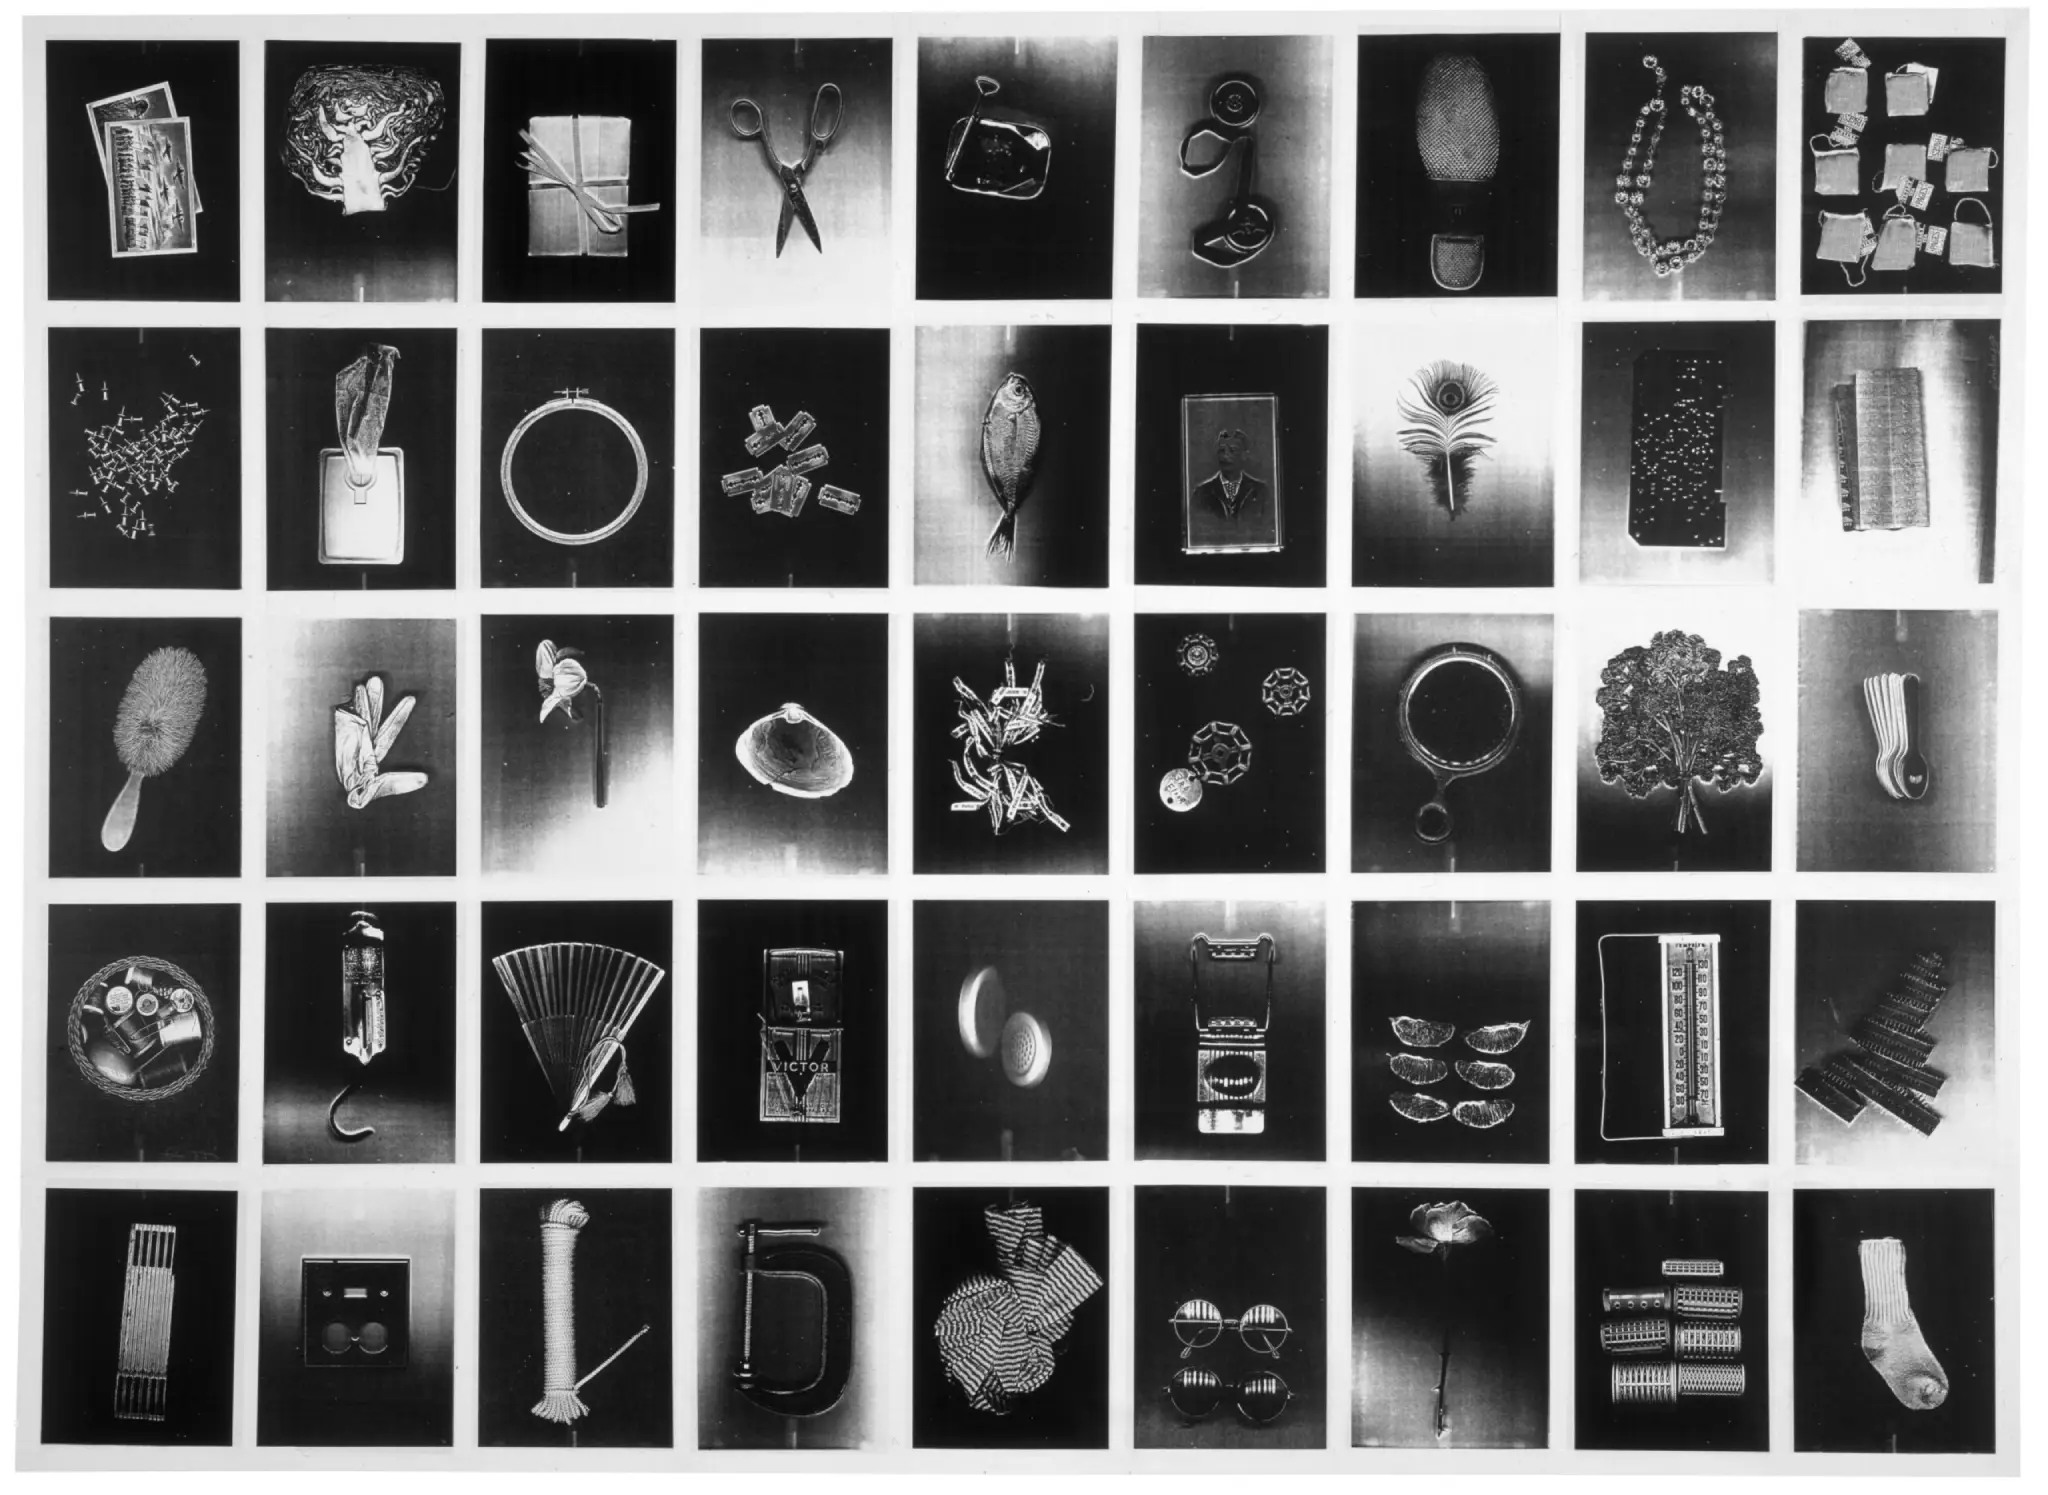 A collection of photocopies of various objects arranged in a grid.